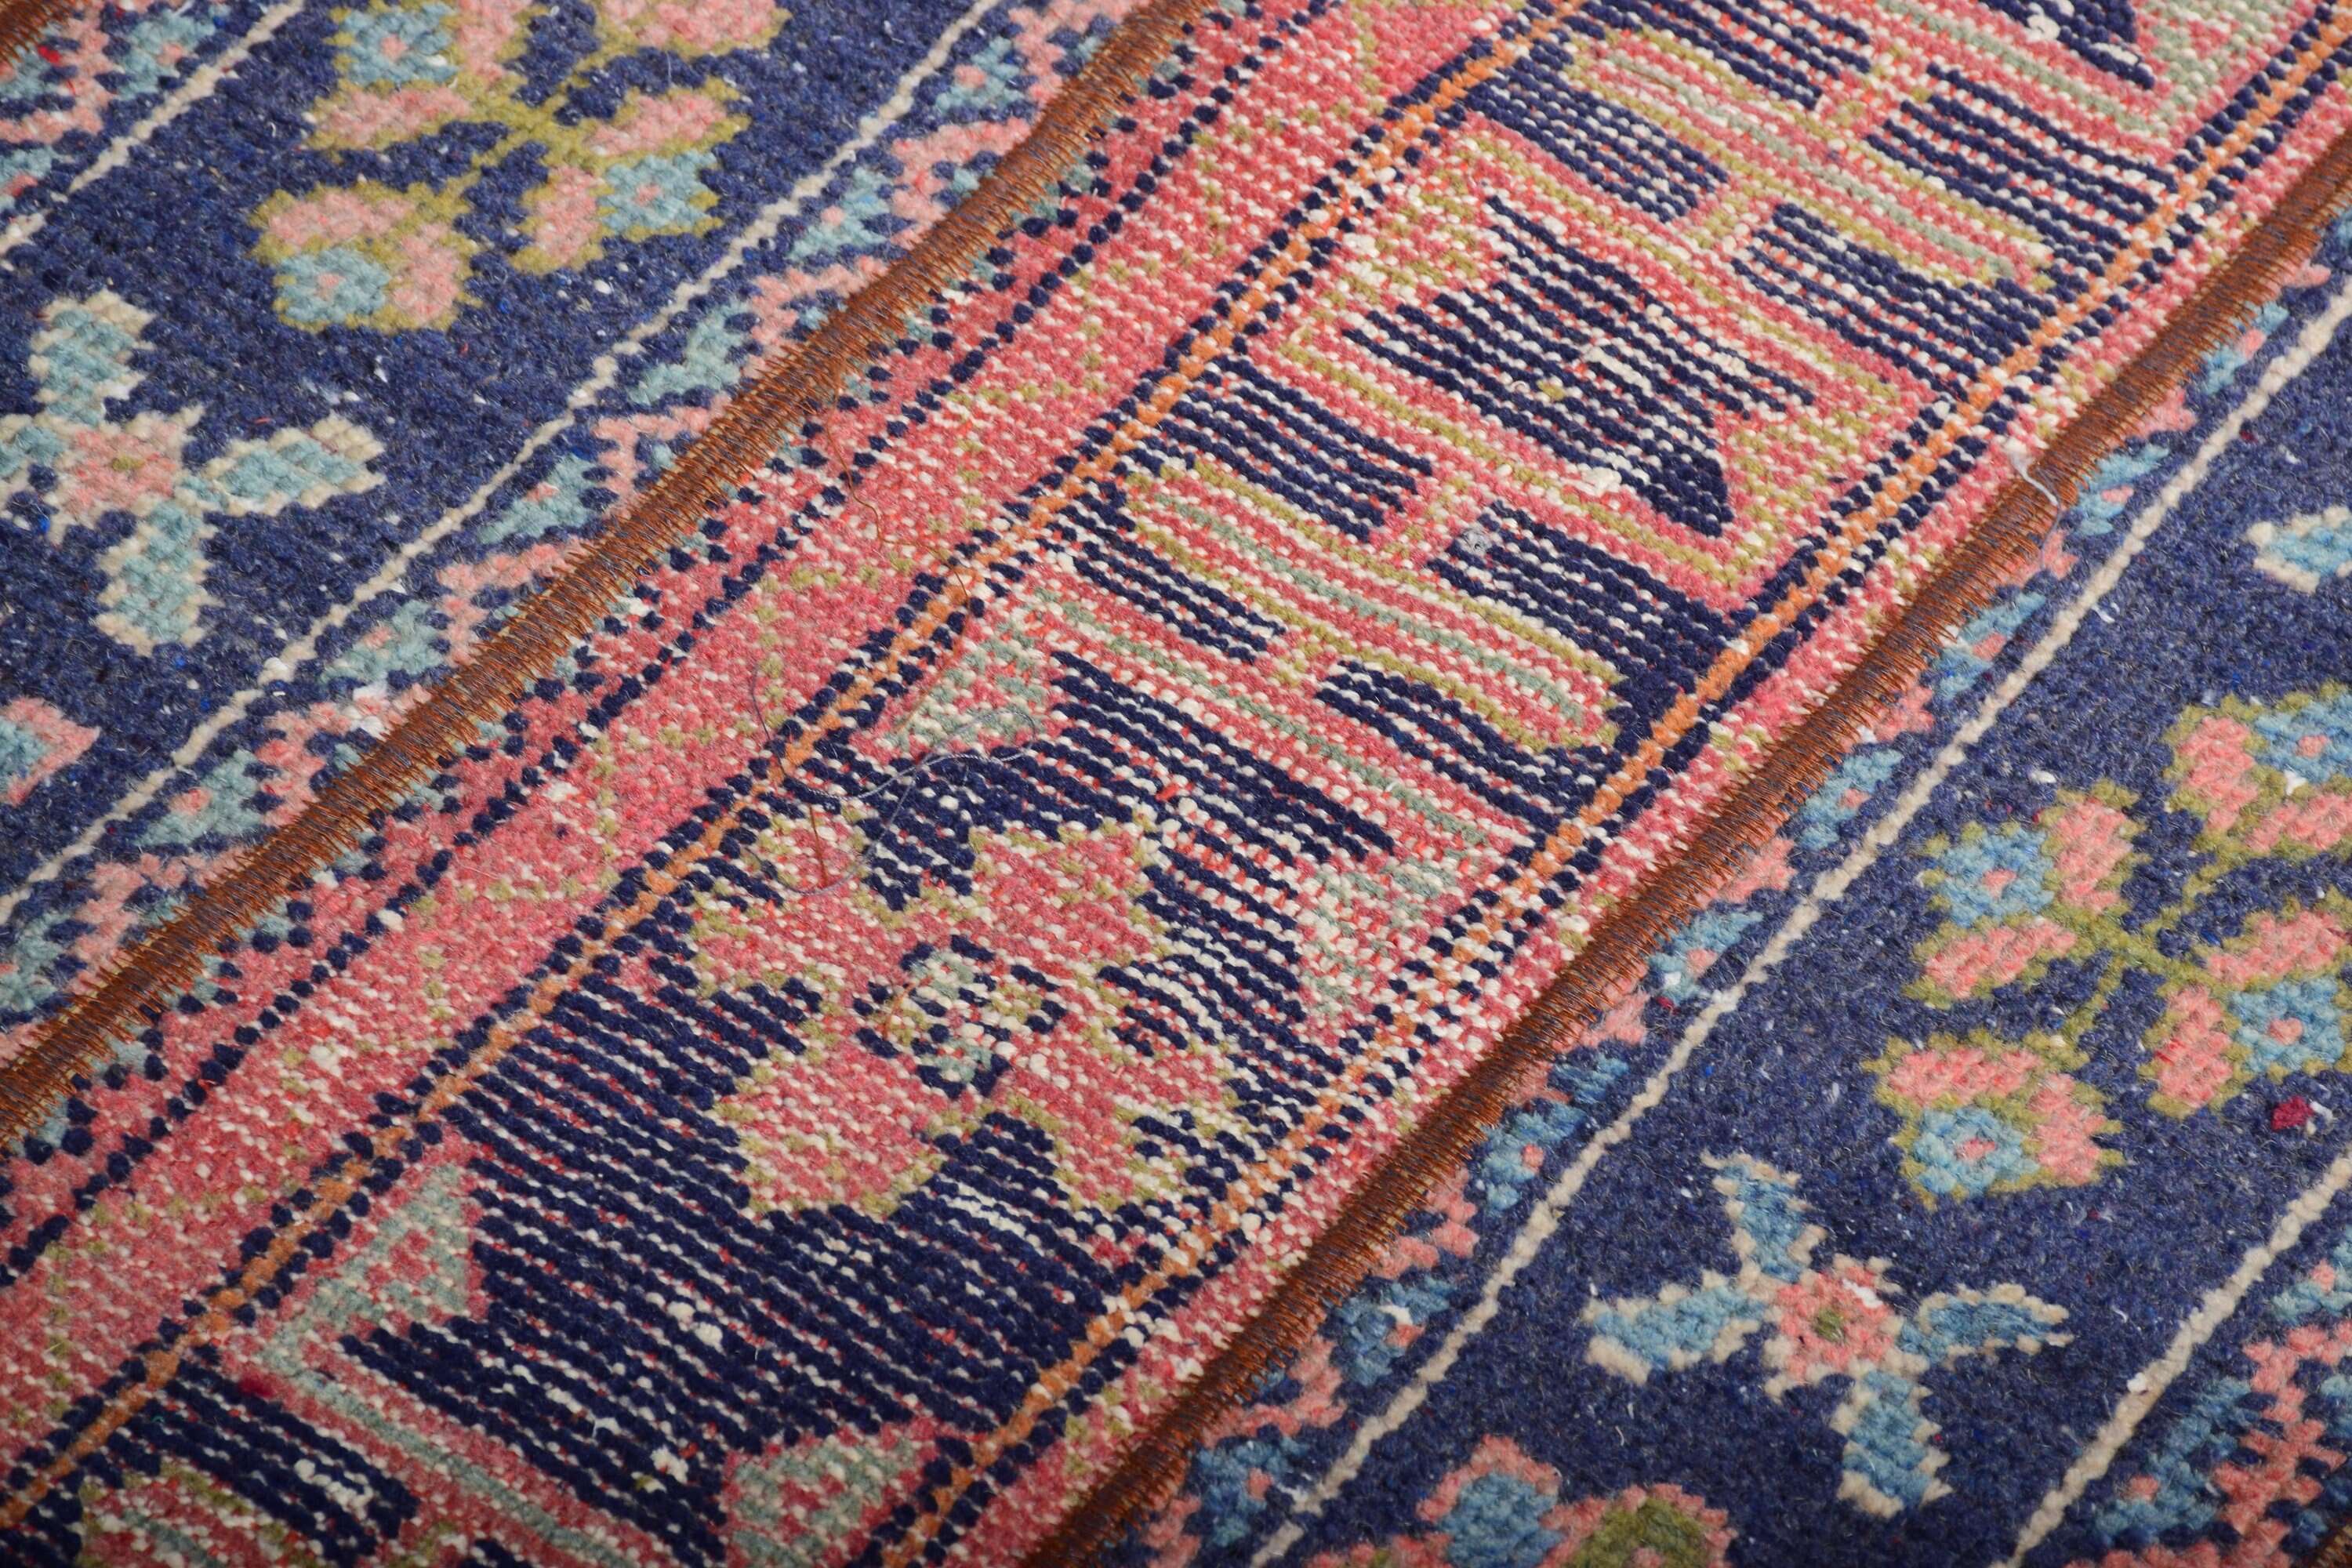 Retro Rug, 2.9x6.4 ft Accent Rugs, Bedroom Rugs, Blue Wool Rug, Turkish Rugs, Home Decor Rug, Kitchen Rug, Vintage Rug, Anatolian Rugs